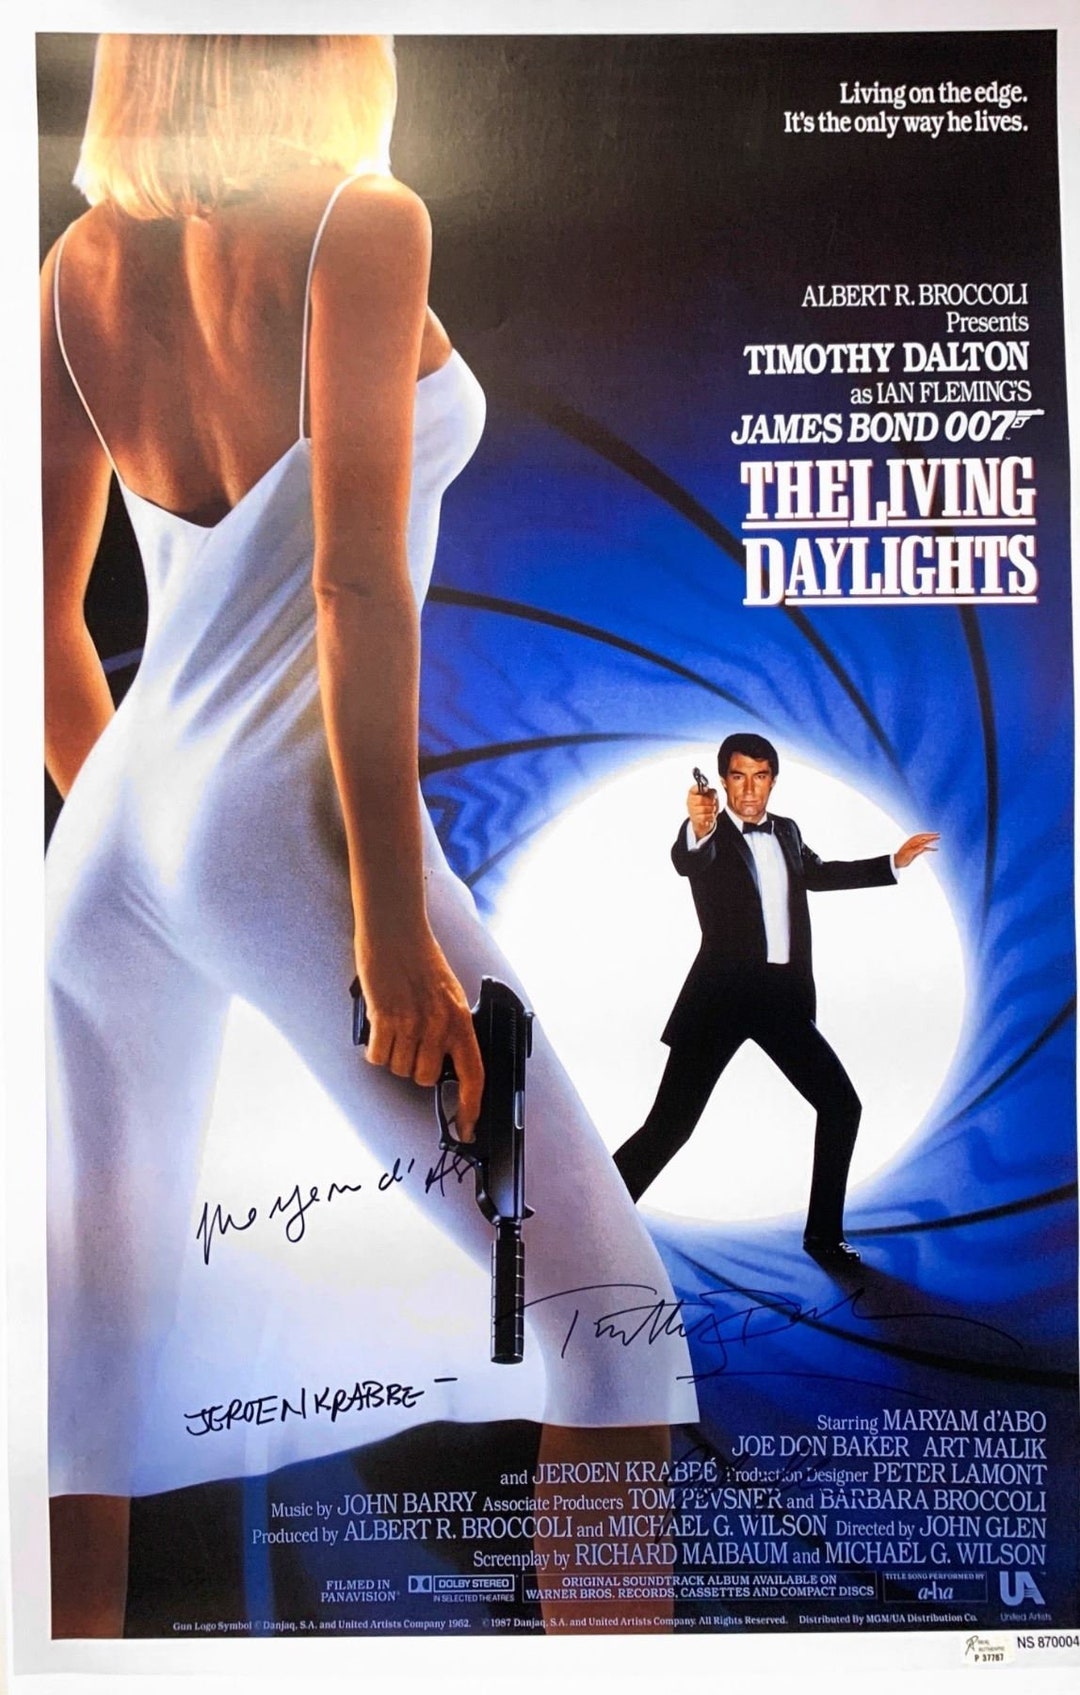 Autograph Signed James Bond 007 the Living Daylights Poster - Etsy